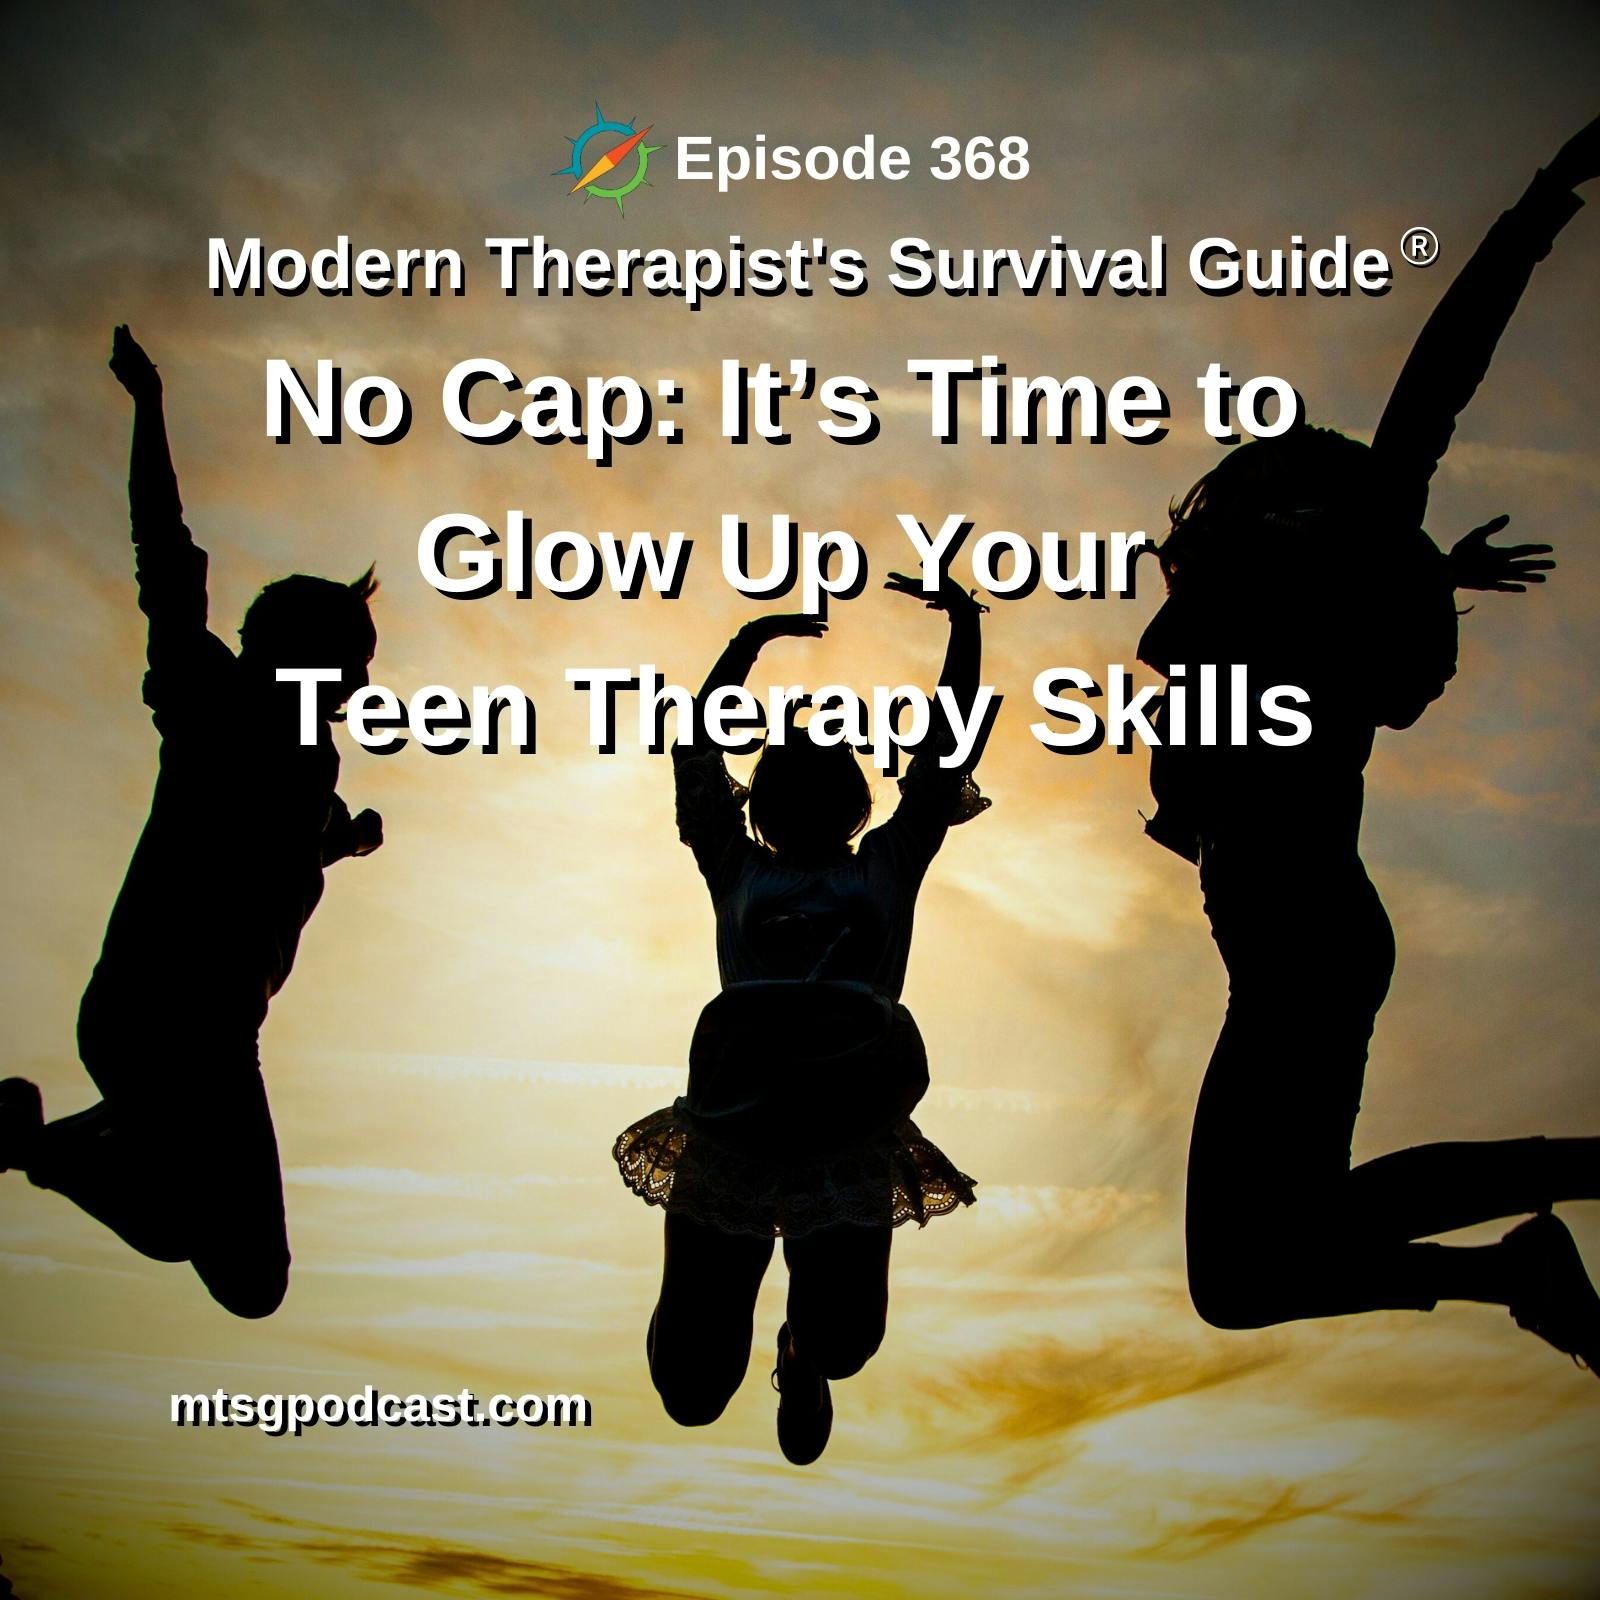 No Cap: It’s Time to Glow Up Your Teen Therapy Skills